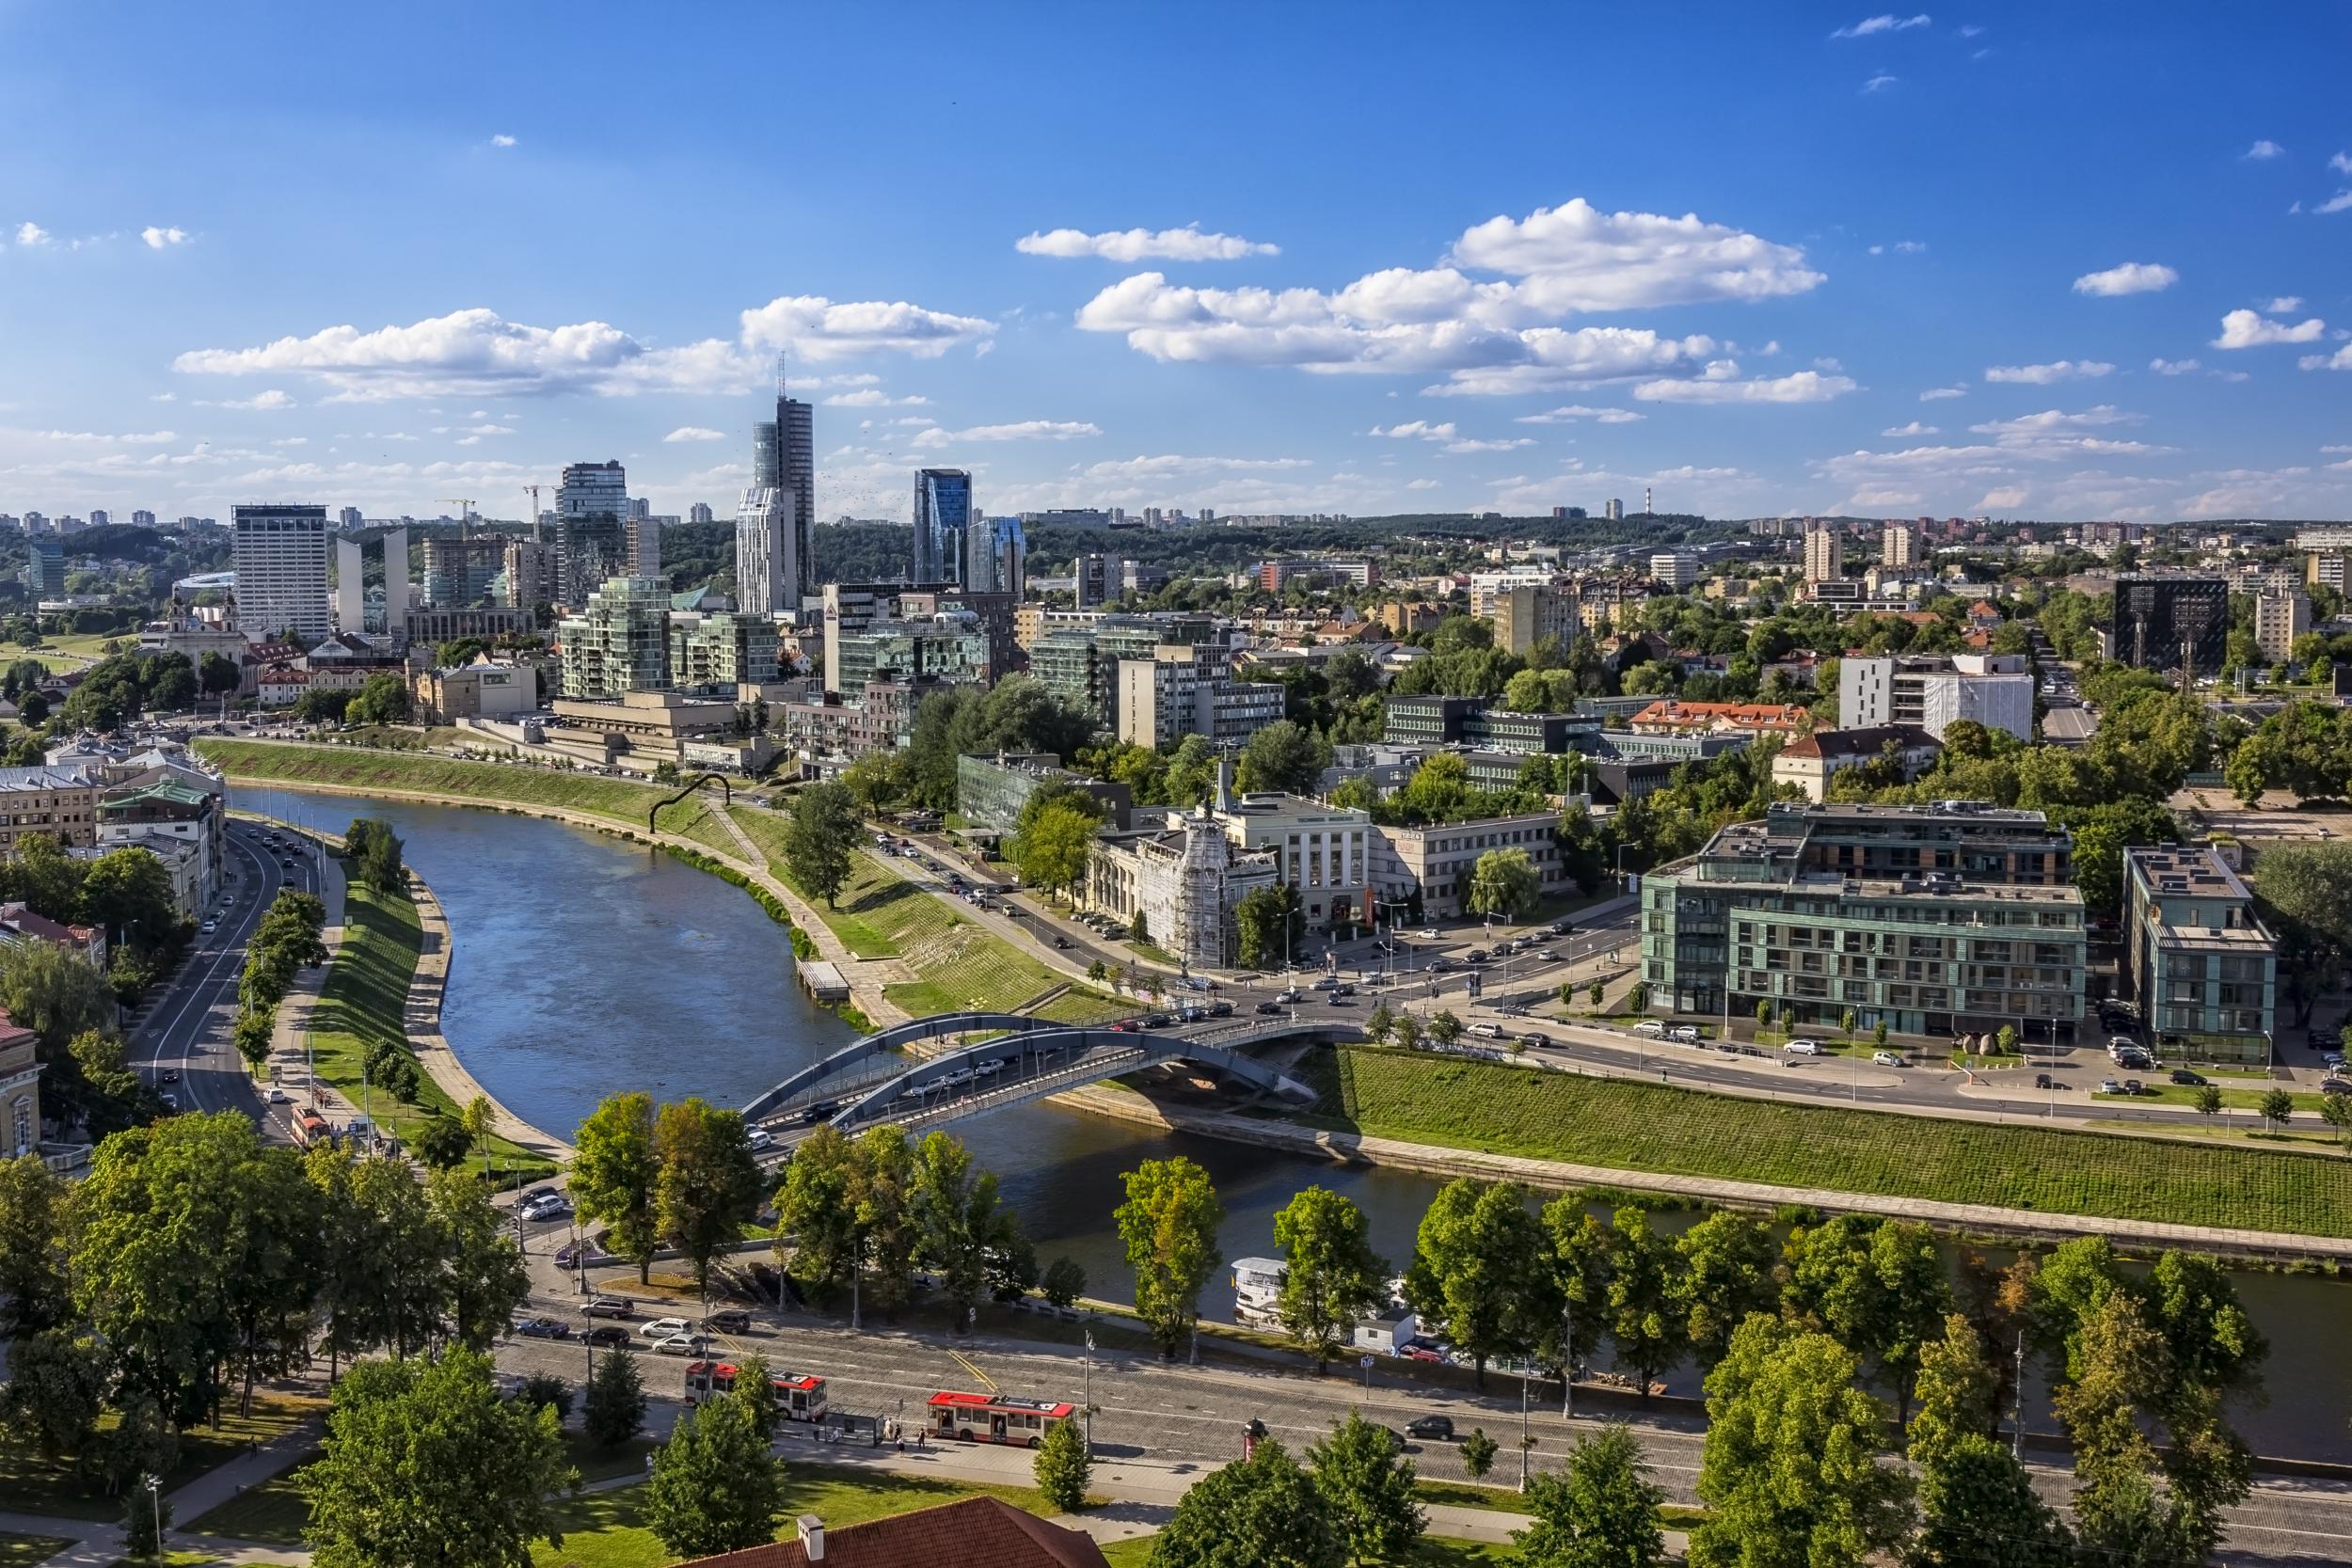 Lithuania’s capital has the Unesco World Heritage-listed Old Town, beautiful botanical gardens, craft brewery tours, street food markets and open-air concerts (iStock)